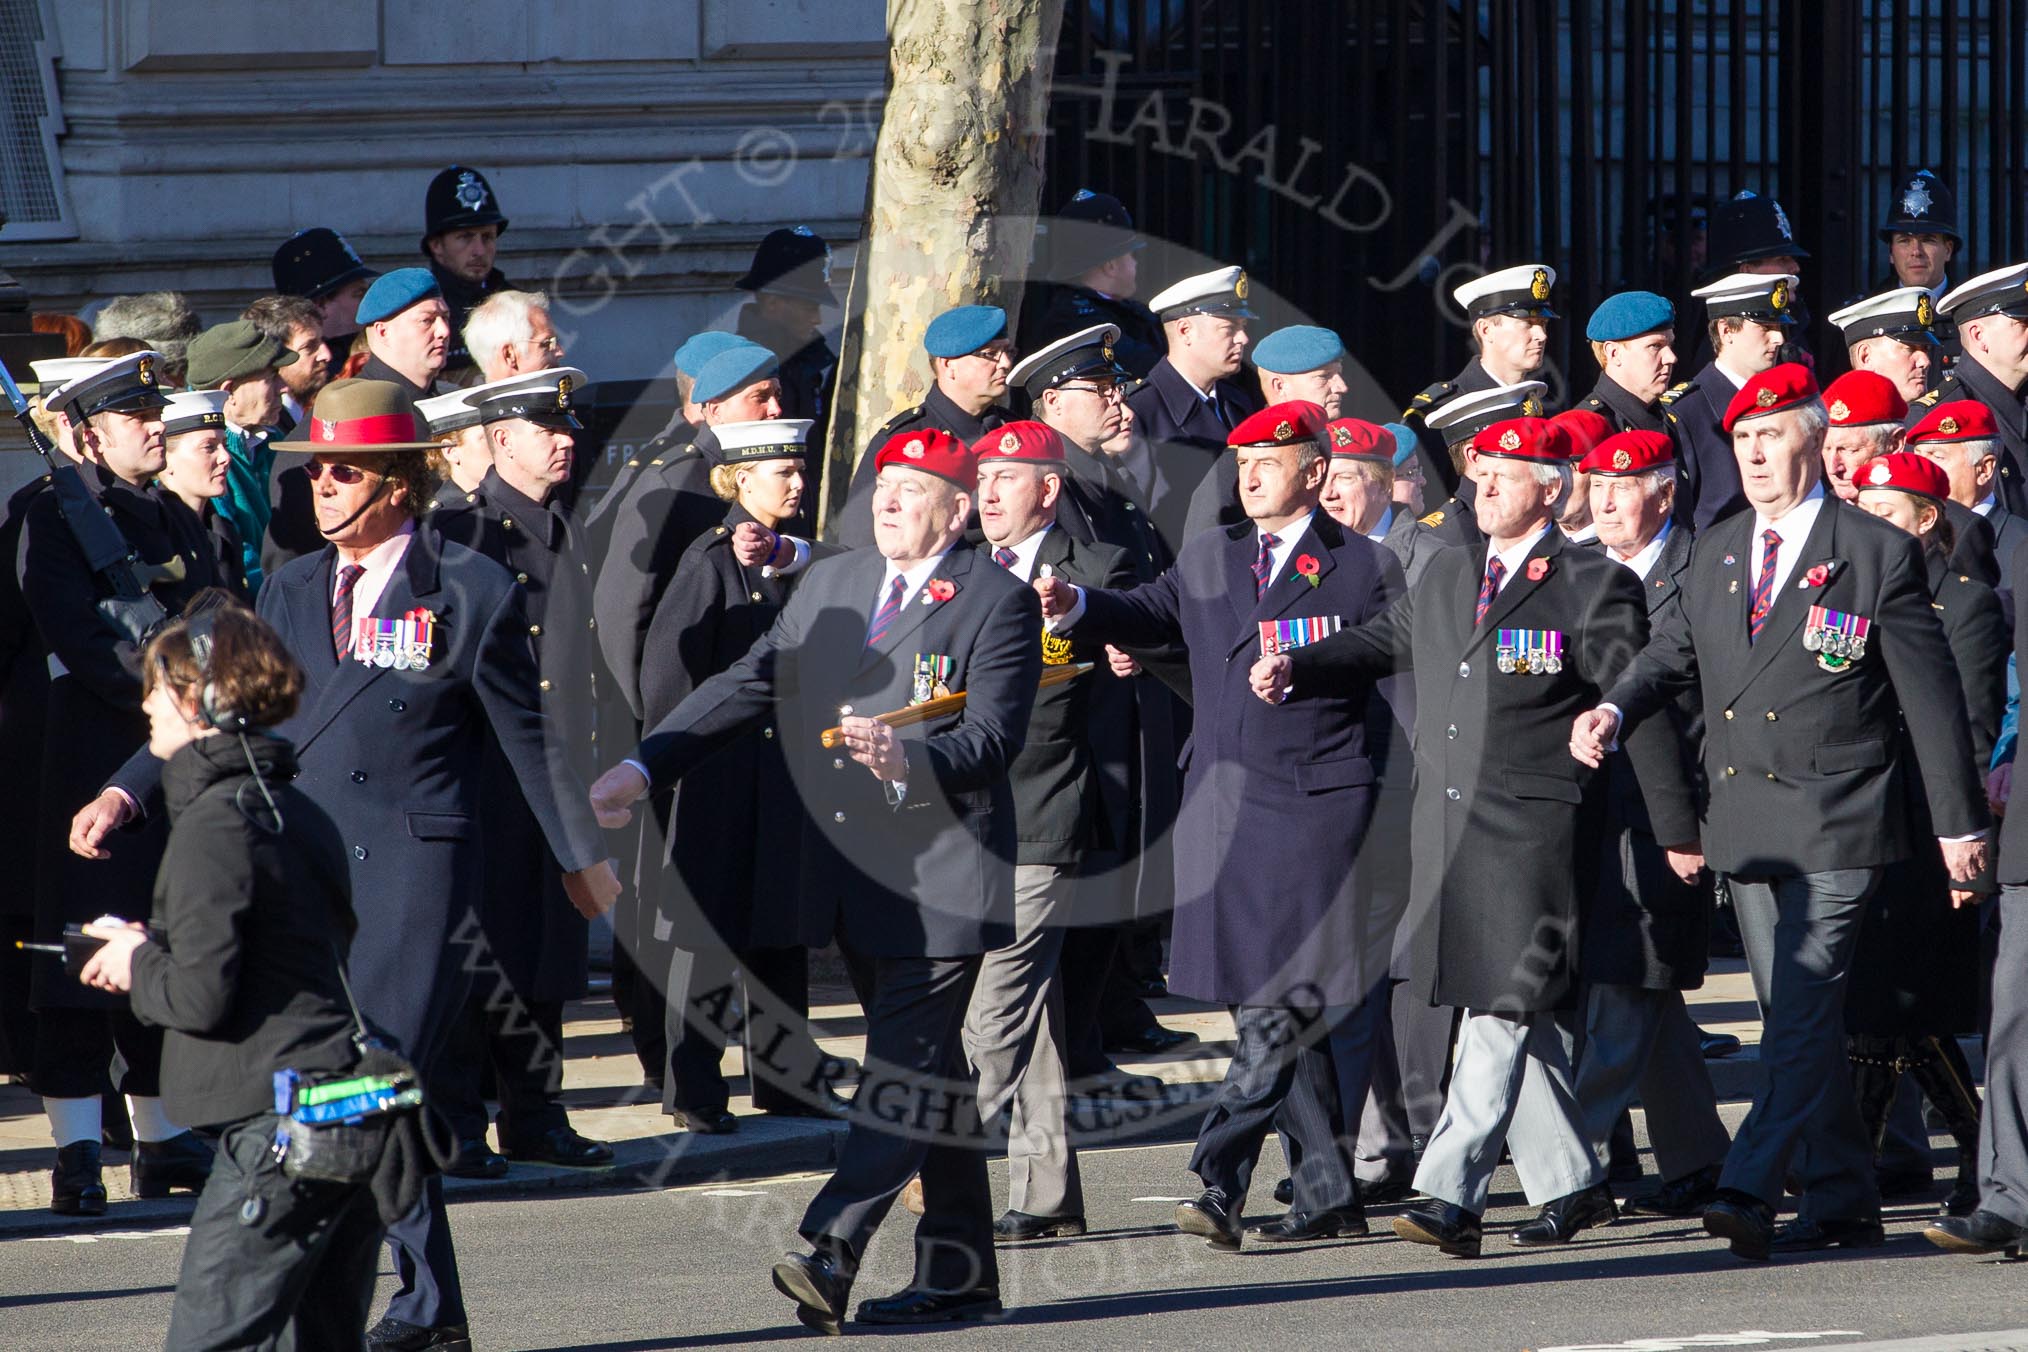 Remembrance Sunday 2012 Cenotaph March Past: Group B3, Royal Military Police Association..
Whitehall, Cenotaph,
London SW1,

United Kingdom,
on 11 November 2012 at 11:55, image #823